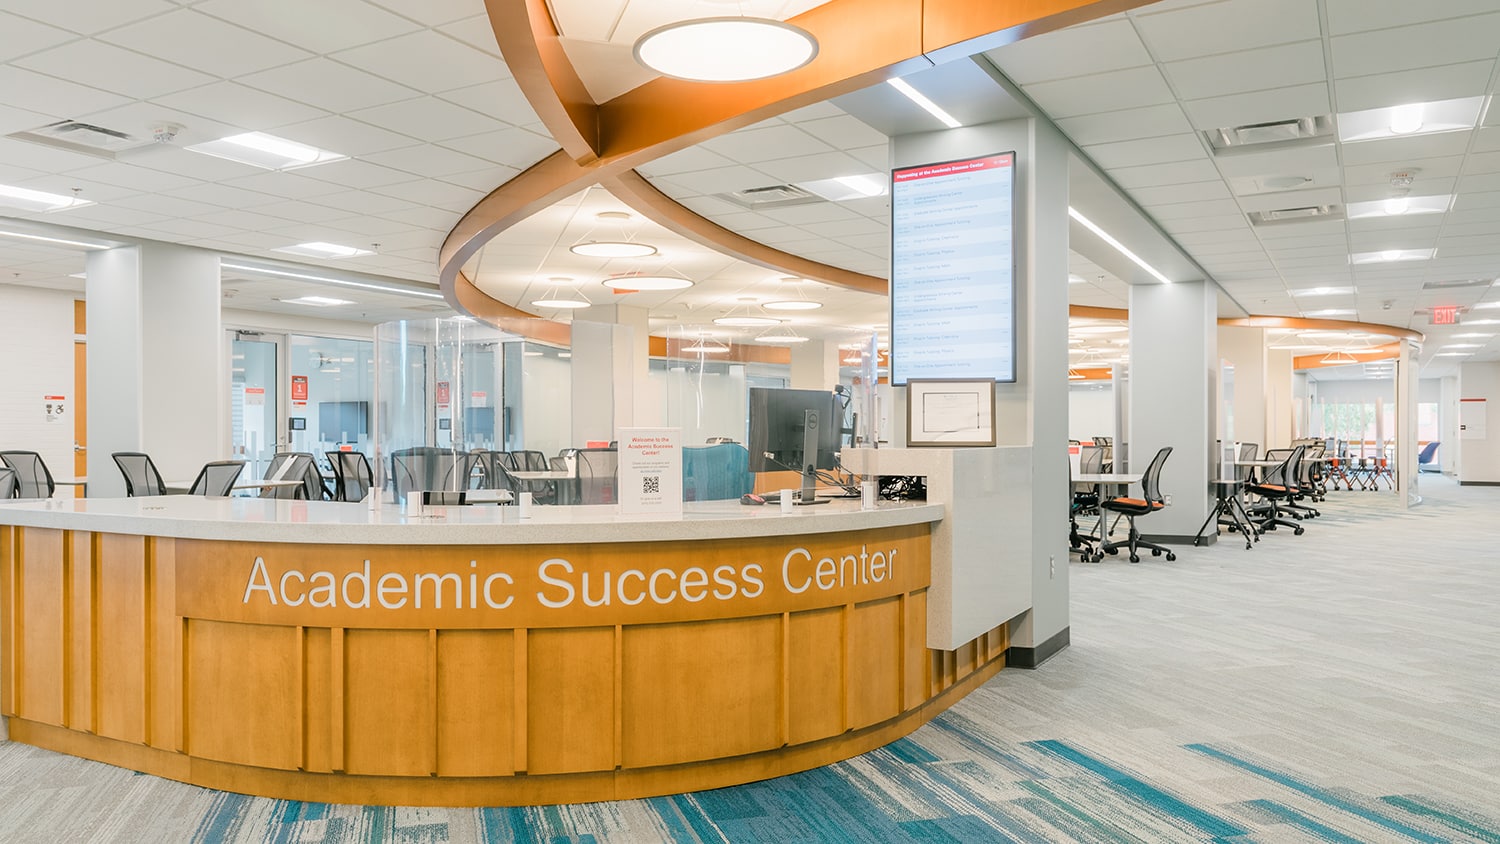 The front desk in the lobby of the Academic Success Center in D.H. Hill Jr. Library.